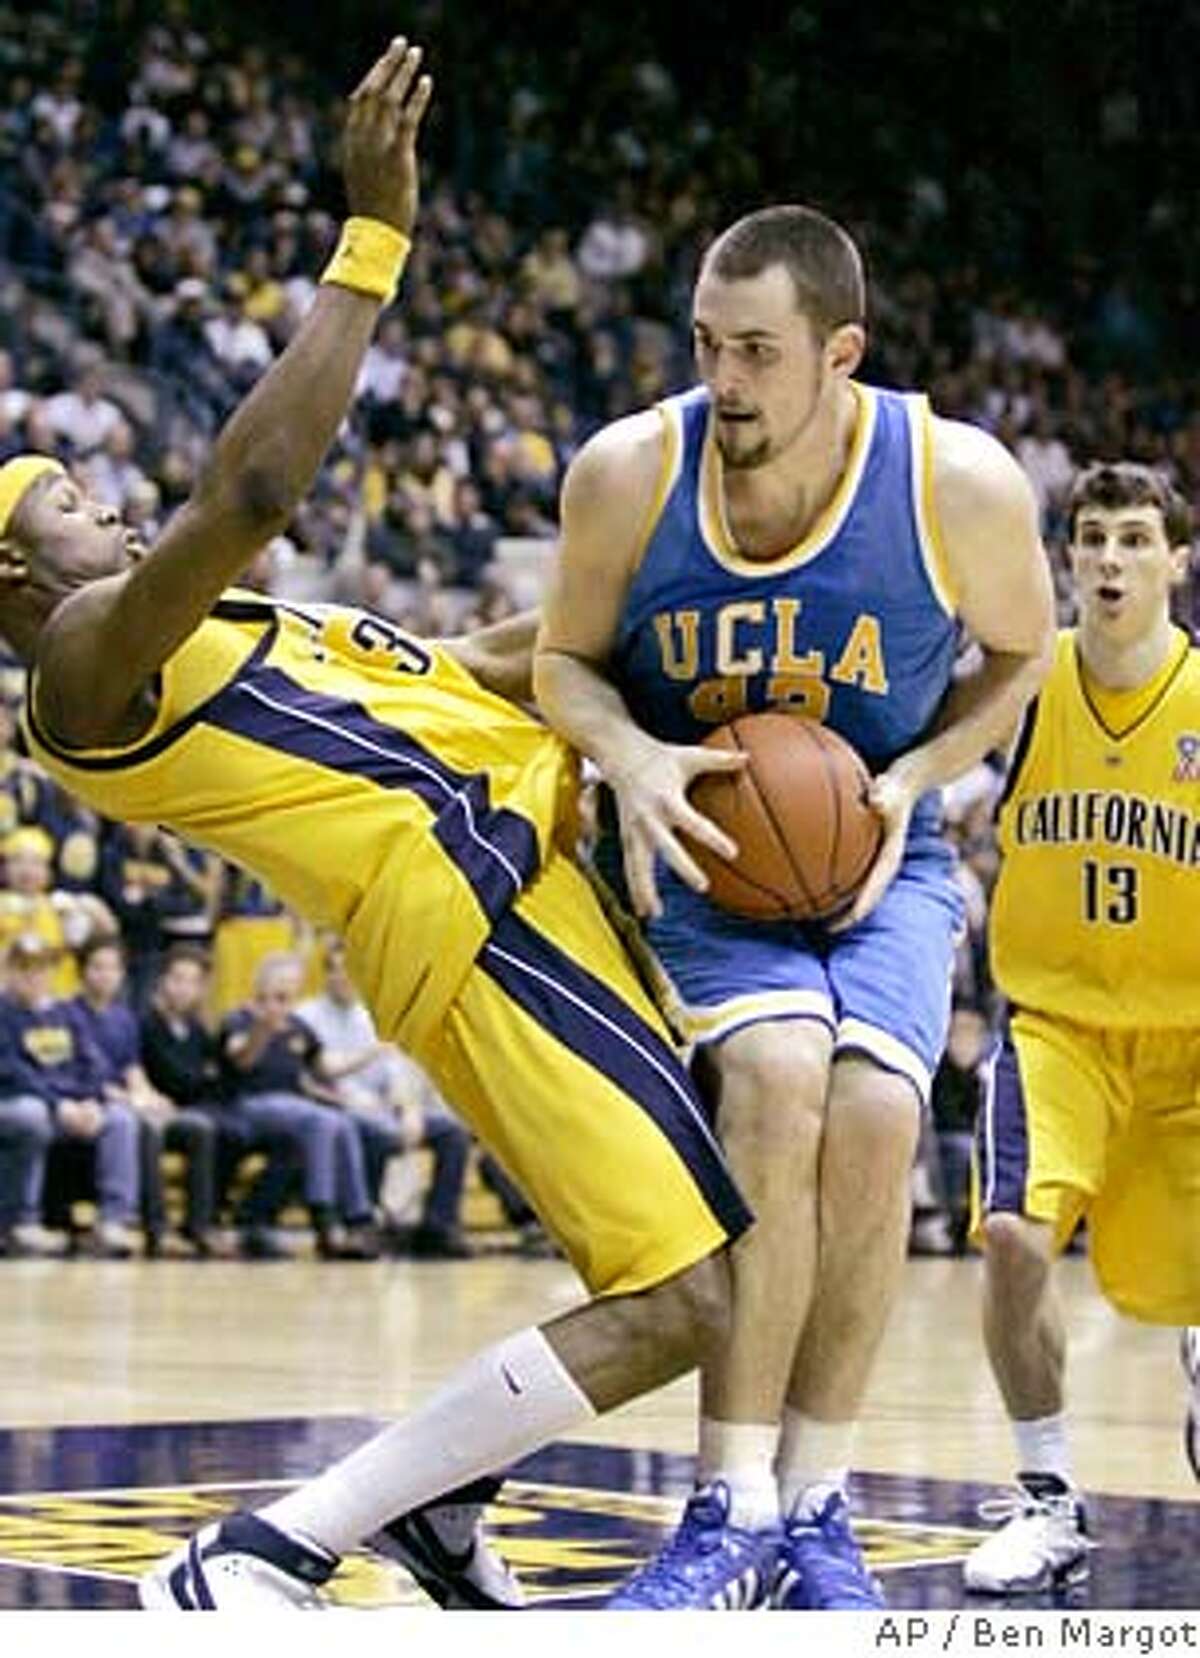 UCLA's Kevin Love (42) drives into California's DeVon Hardin, left, during the first half of a college basketball game Saturday, Jan. 5, 2008, in Berkeley, Calif. (AP Photo/Ben Margot) EFE OUT